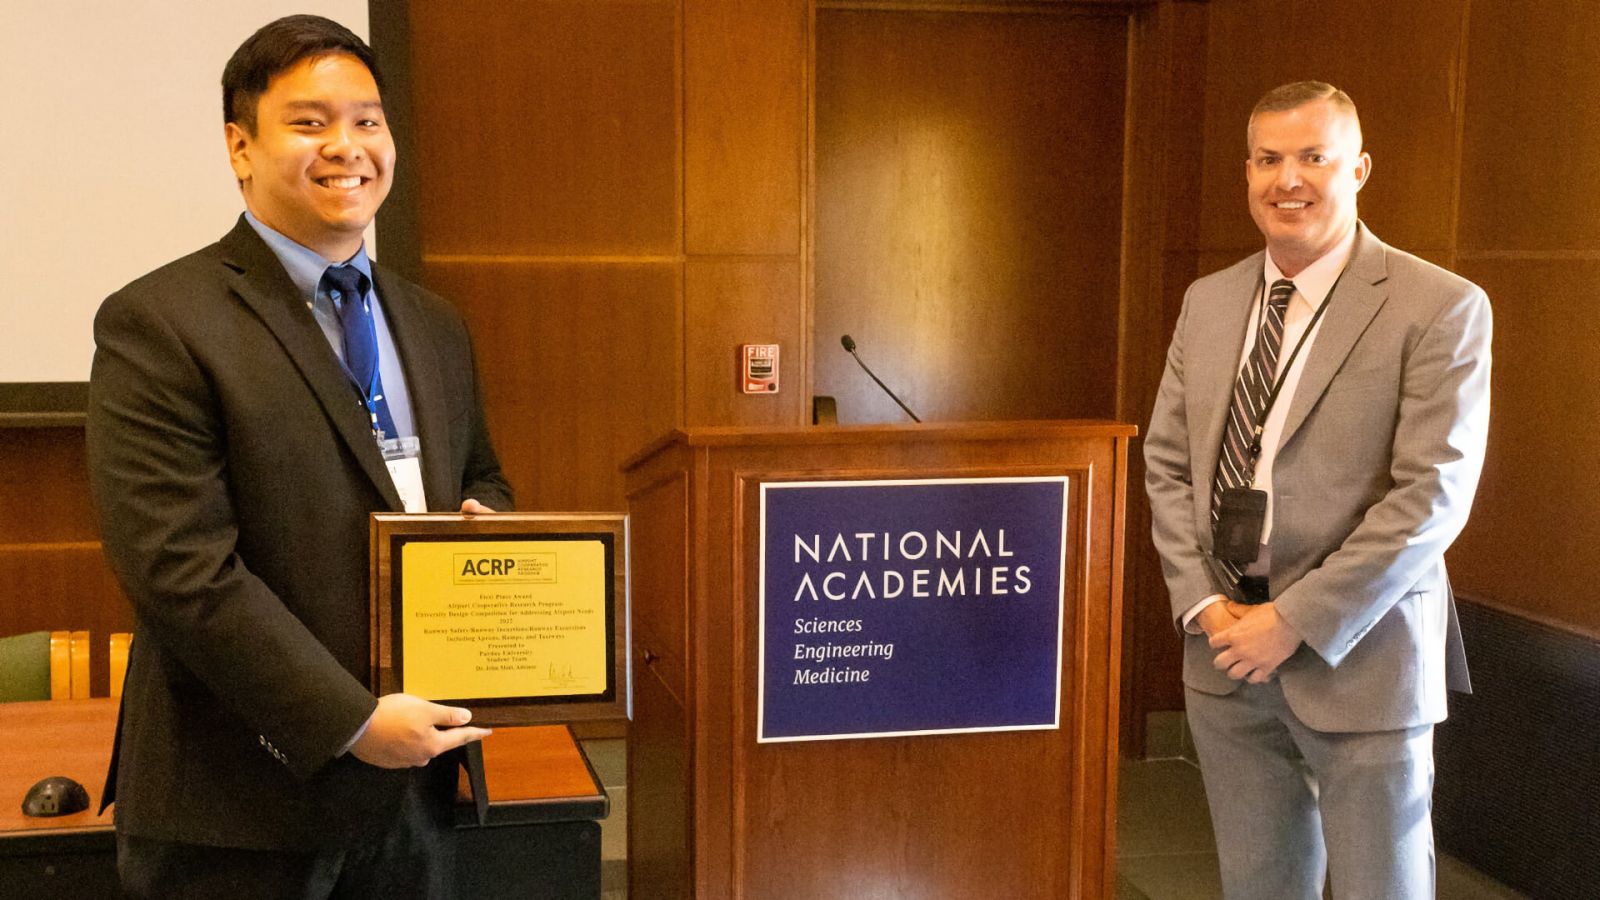 Luigi Dy (left), accepts the first-place award for the Runway Safety Challenge area in the Airport Cooperative Research Program’s University Design Competition for Addressing Airport Needs from Joe Winingar, acting director of safety, Air Traffic Organization, Federal Aviation Administration (FAA), at an award ceremony at the National Academy of Sciences building in Washington, DC. (Photo courtesy of the Virginia Space Grant Consortium)